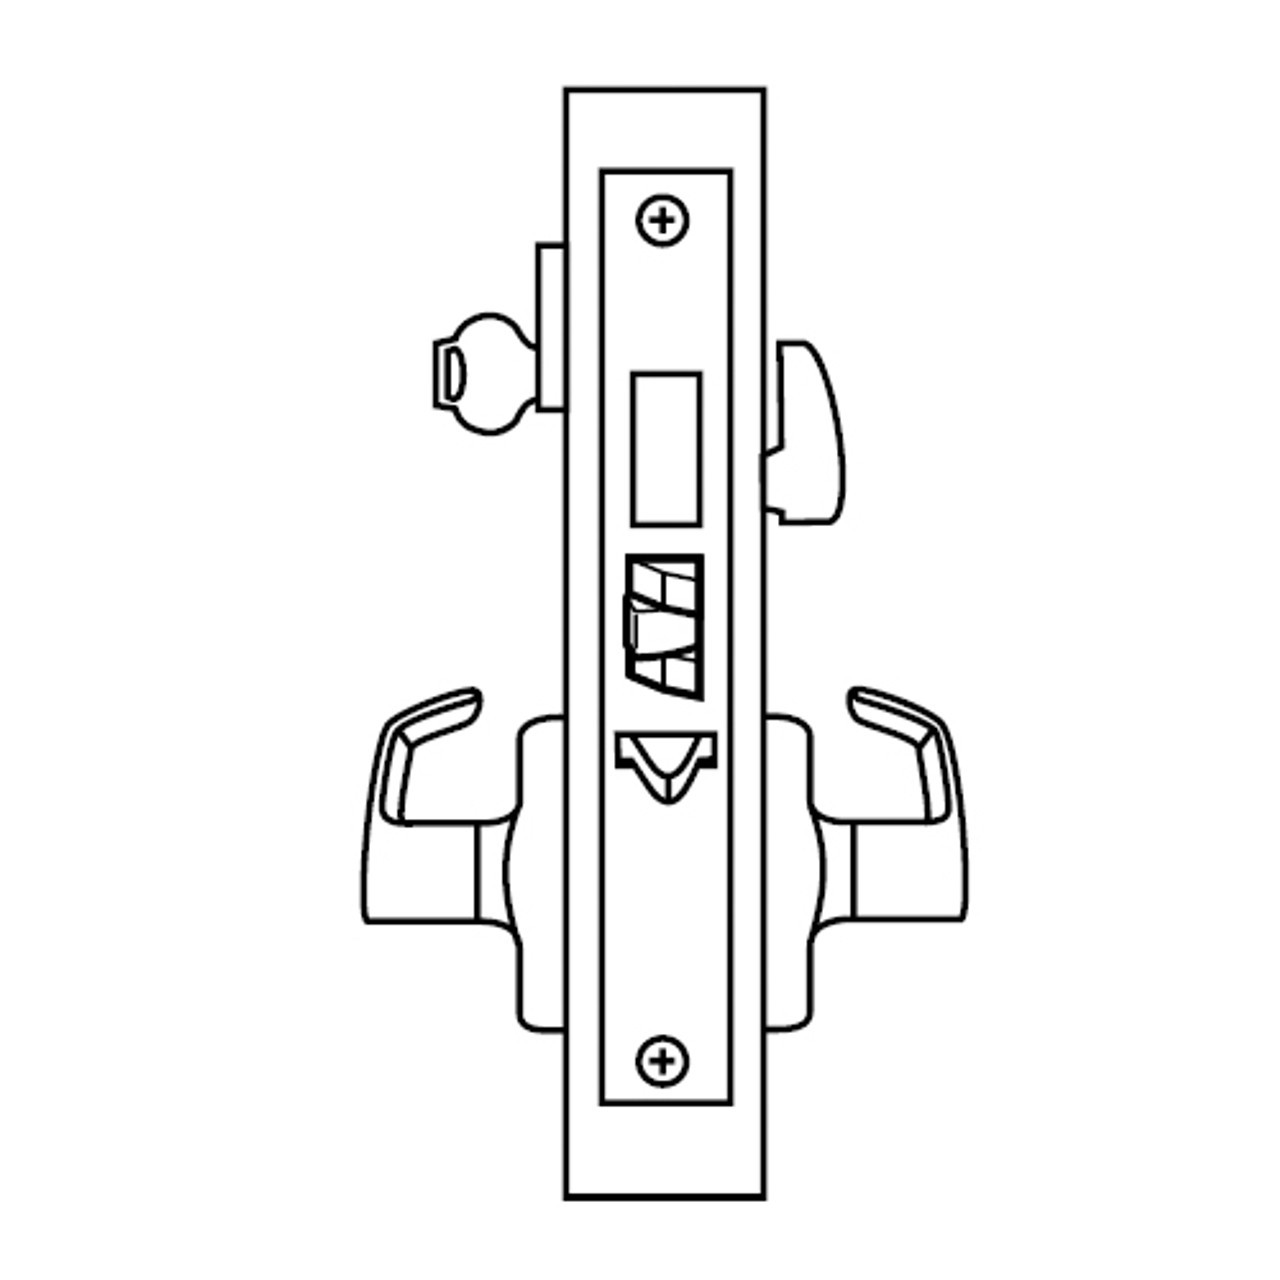 ML2075-DSR-629-LH Corbin Russwin ML2000 Series Mortise Entrance or Office Security Locksets with Dirke Lever and Deadbolt in Bright Stainless Steel